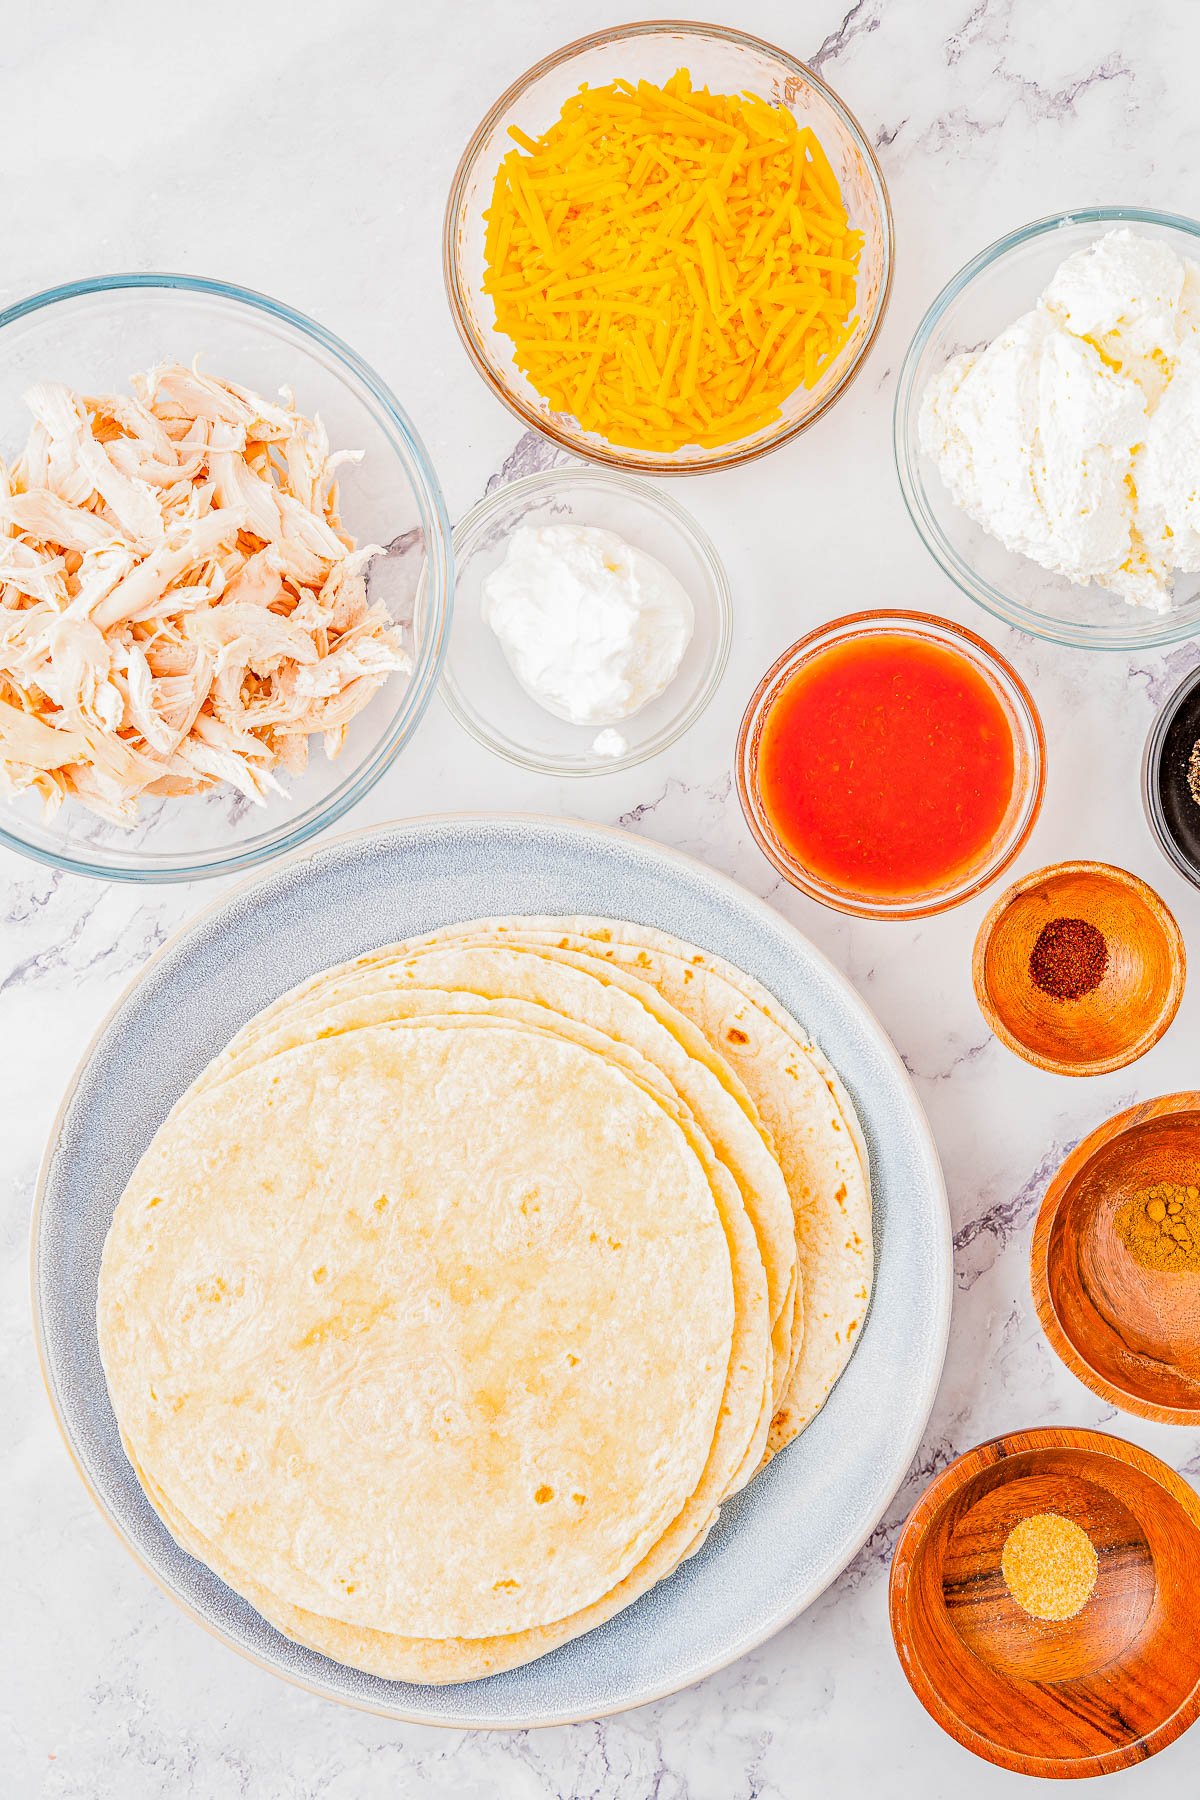 Ingredients for making taquitos, including shredded chicken, cheddar cheese, sour cream, salsa, and tortillas, displayed in separate bowls on a marble countertop.